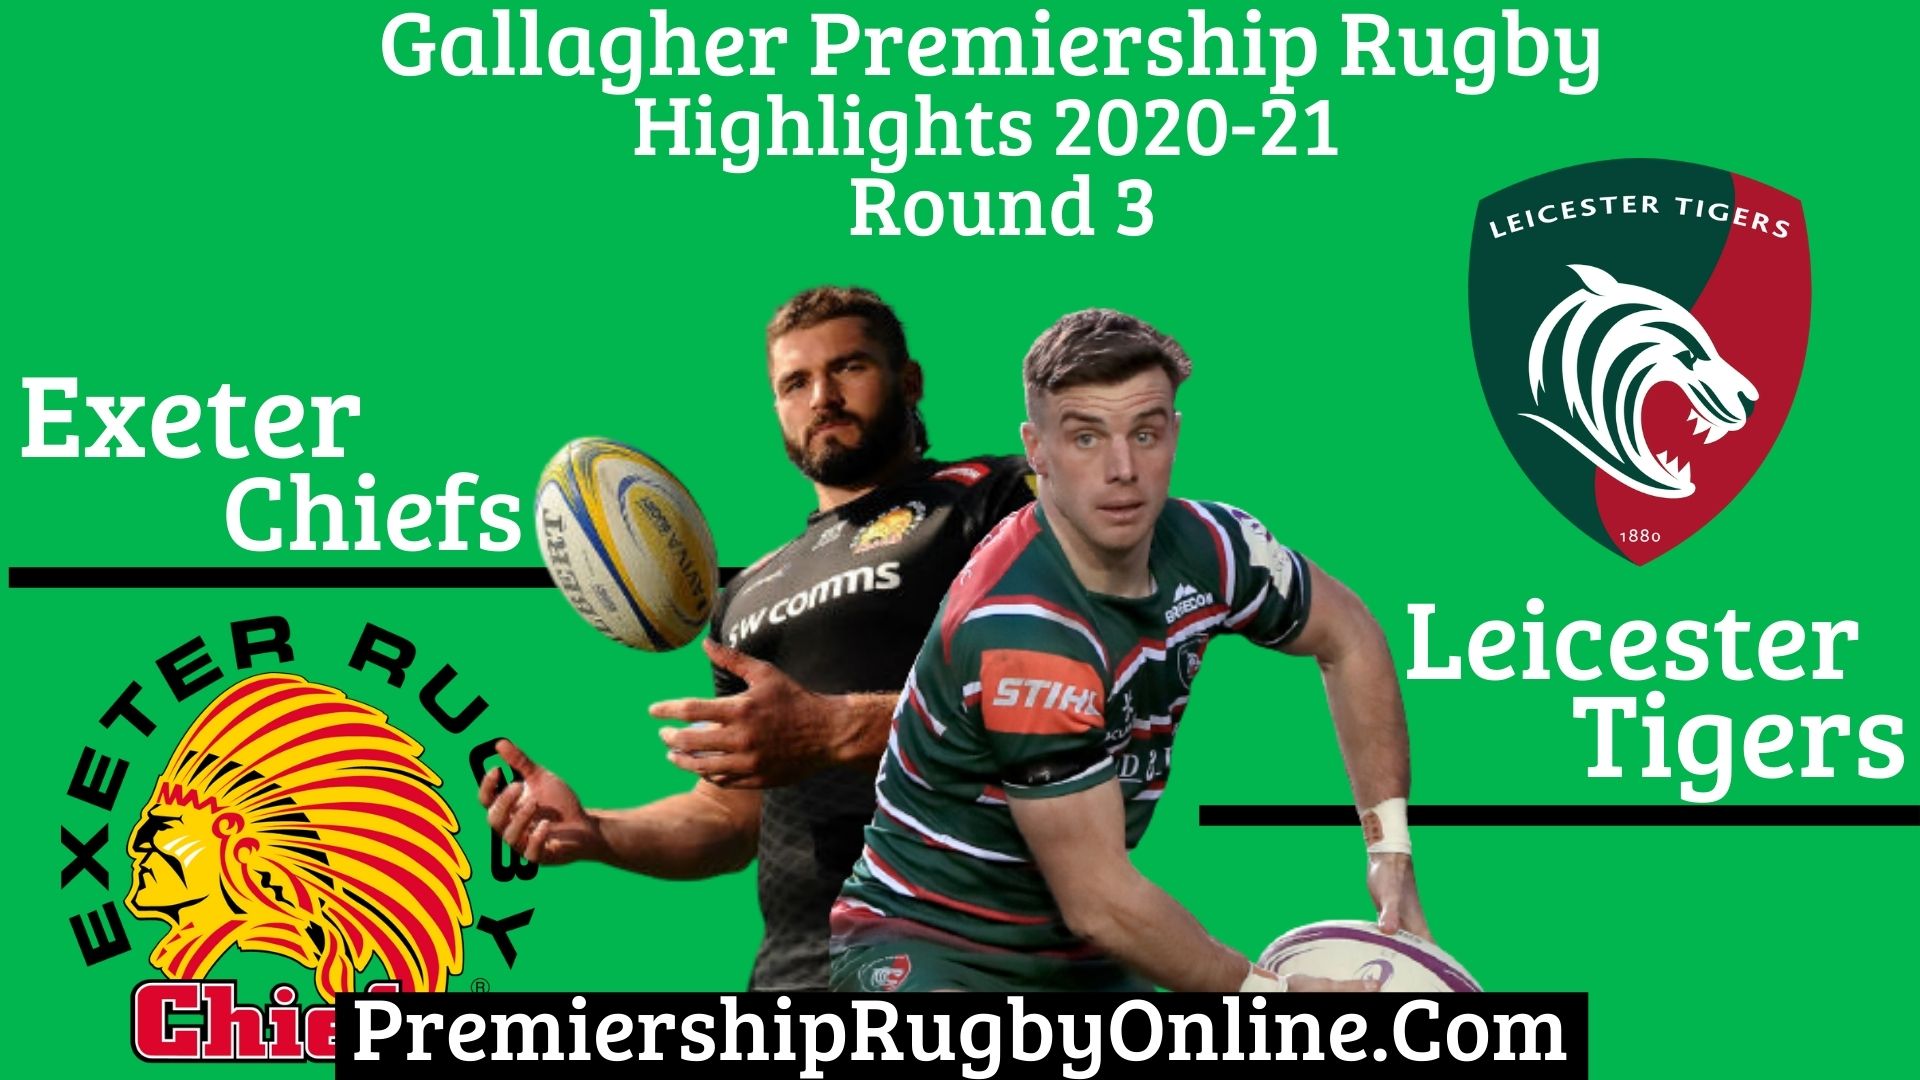 Leicester Tigers Vs Exeter Chiefs Highlights 2020 RD 3